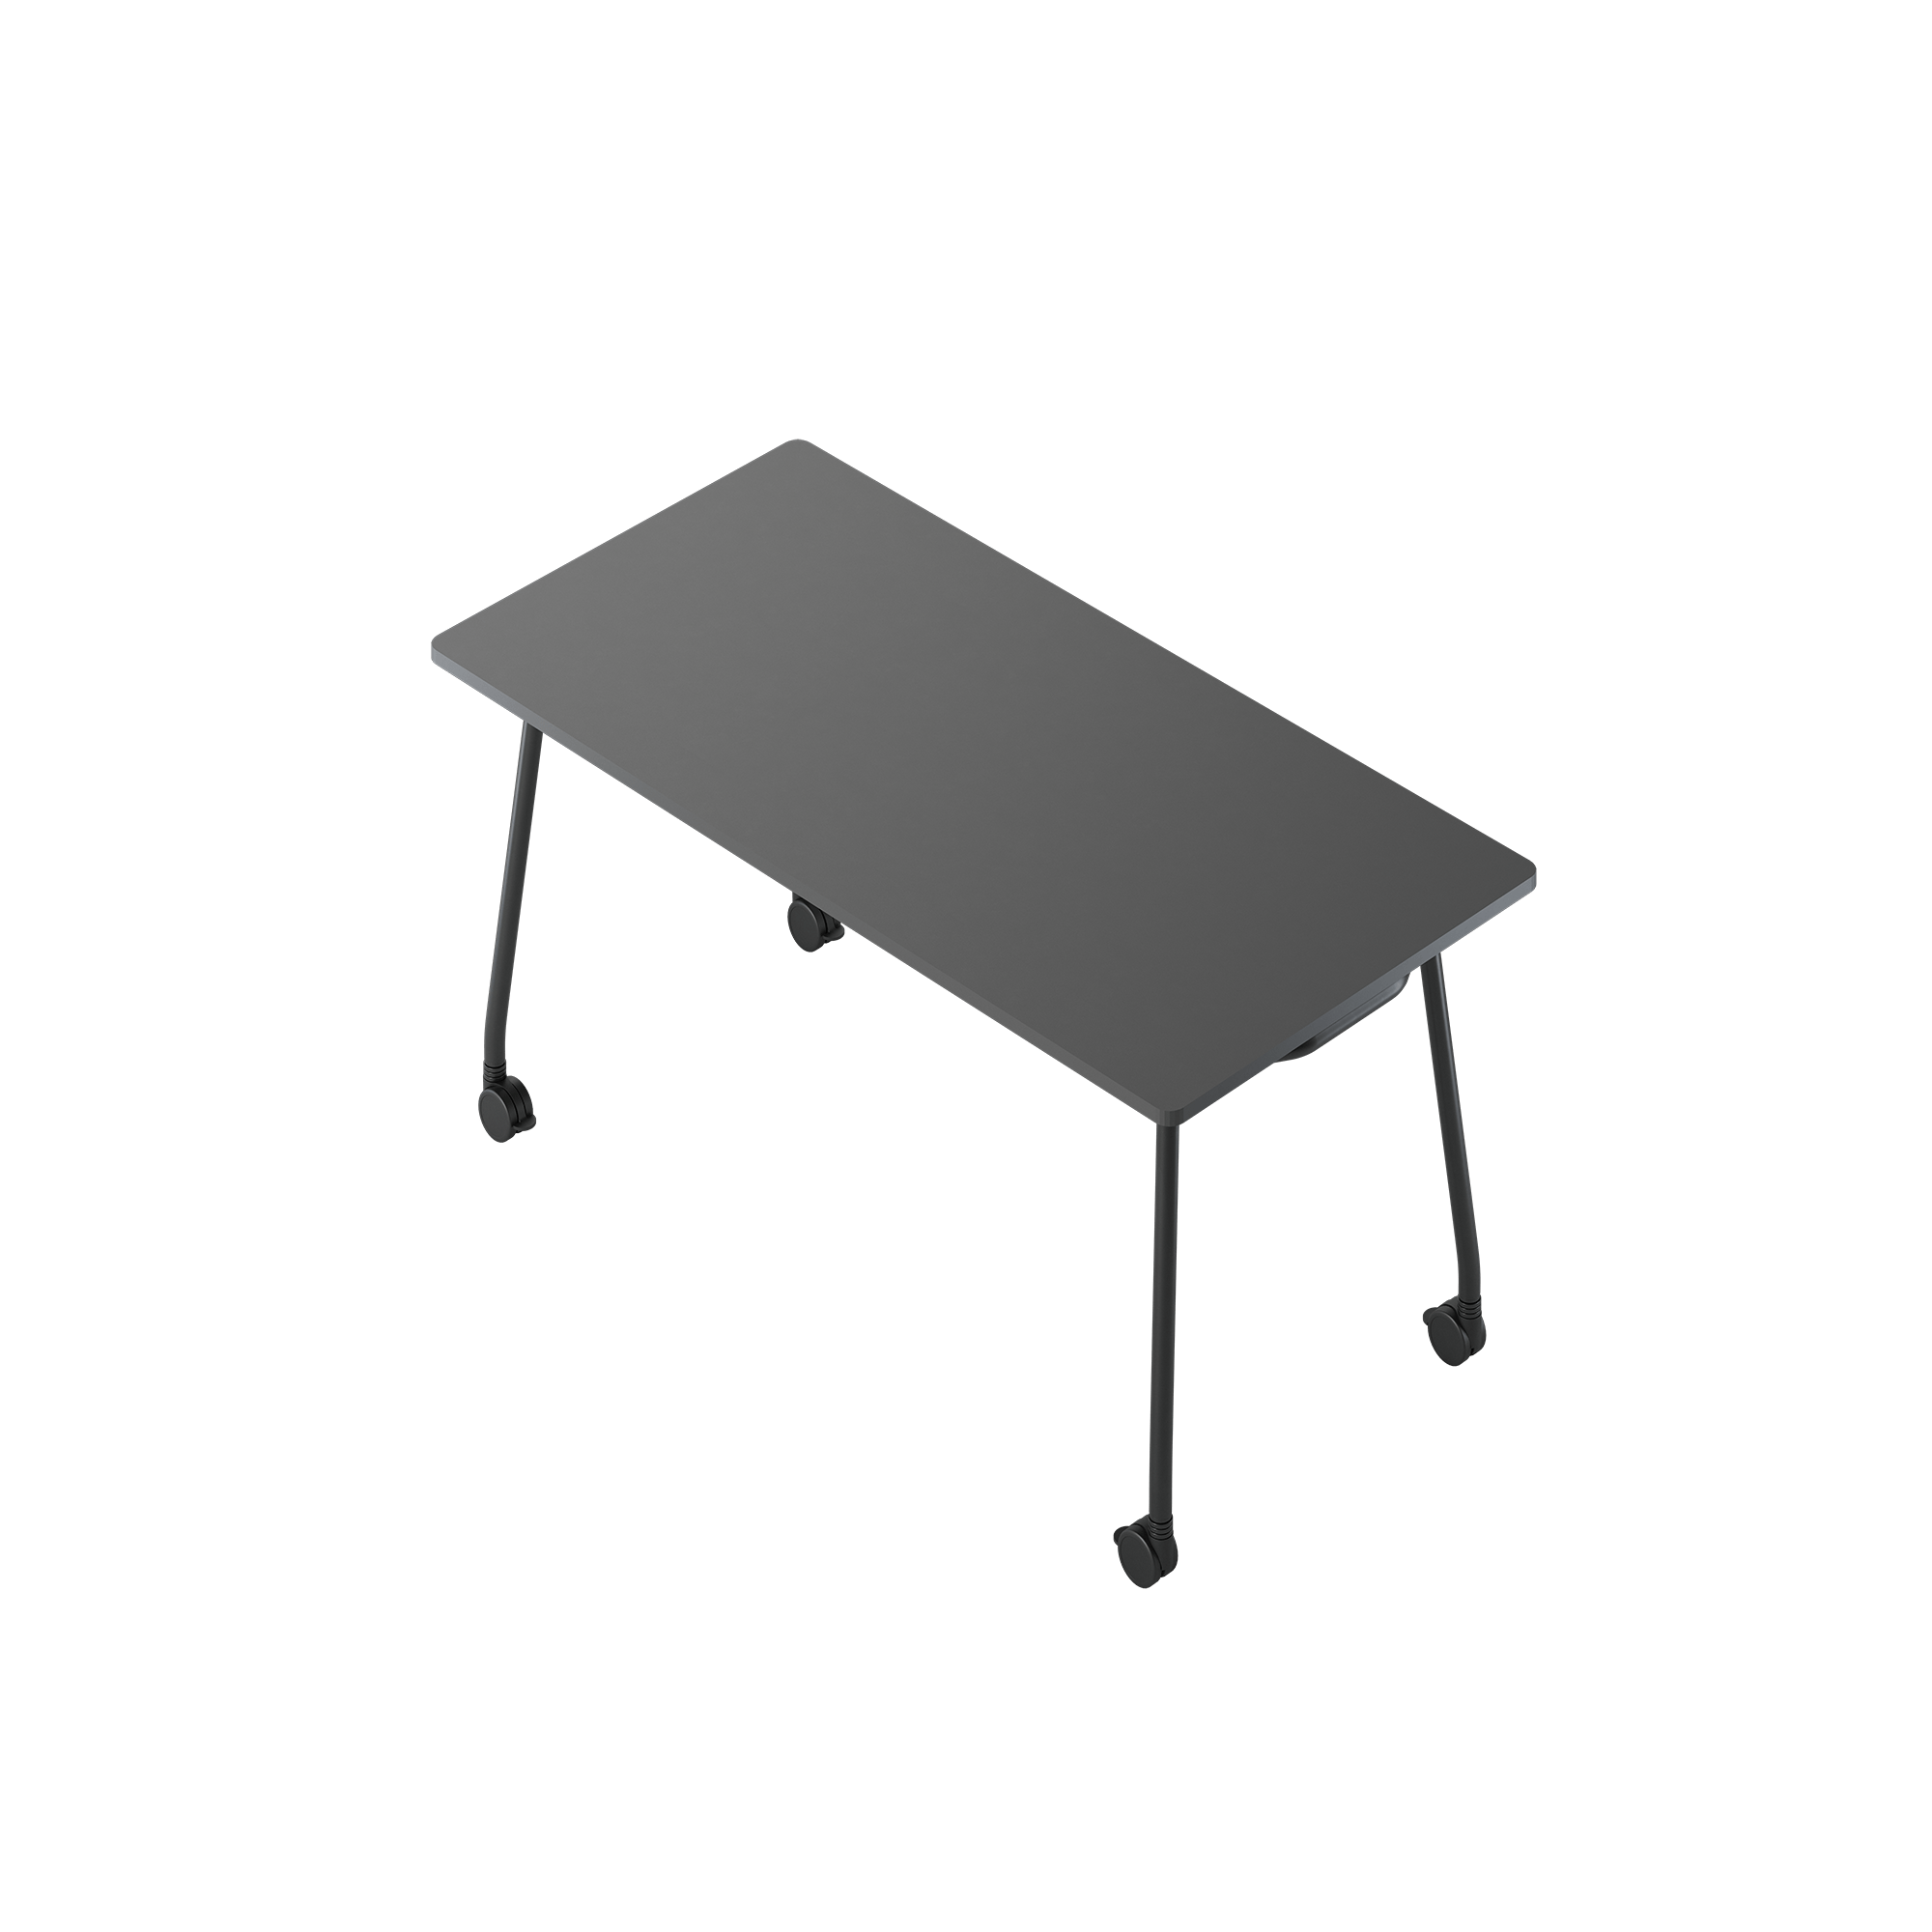 A black table with black legs